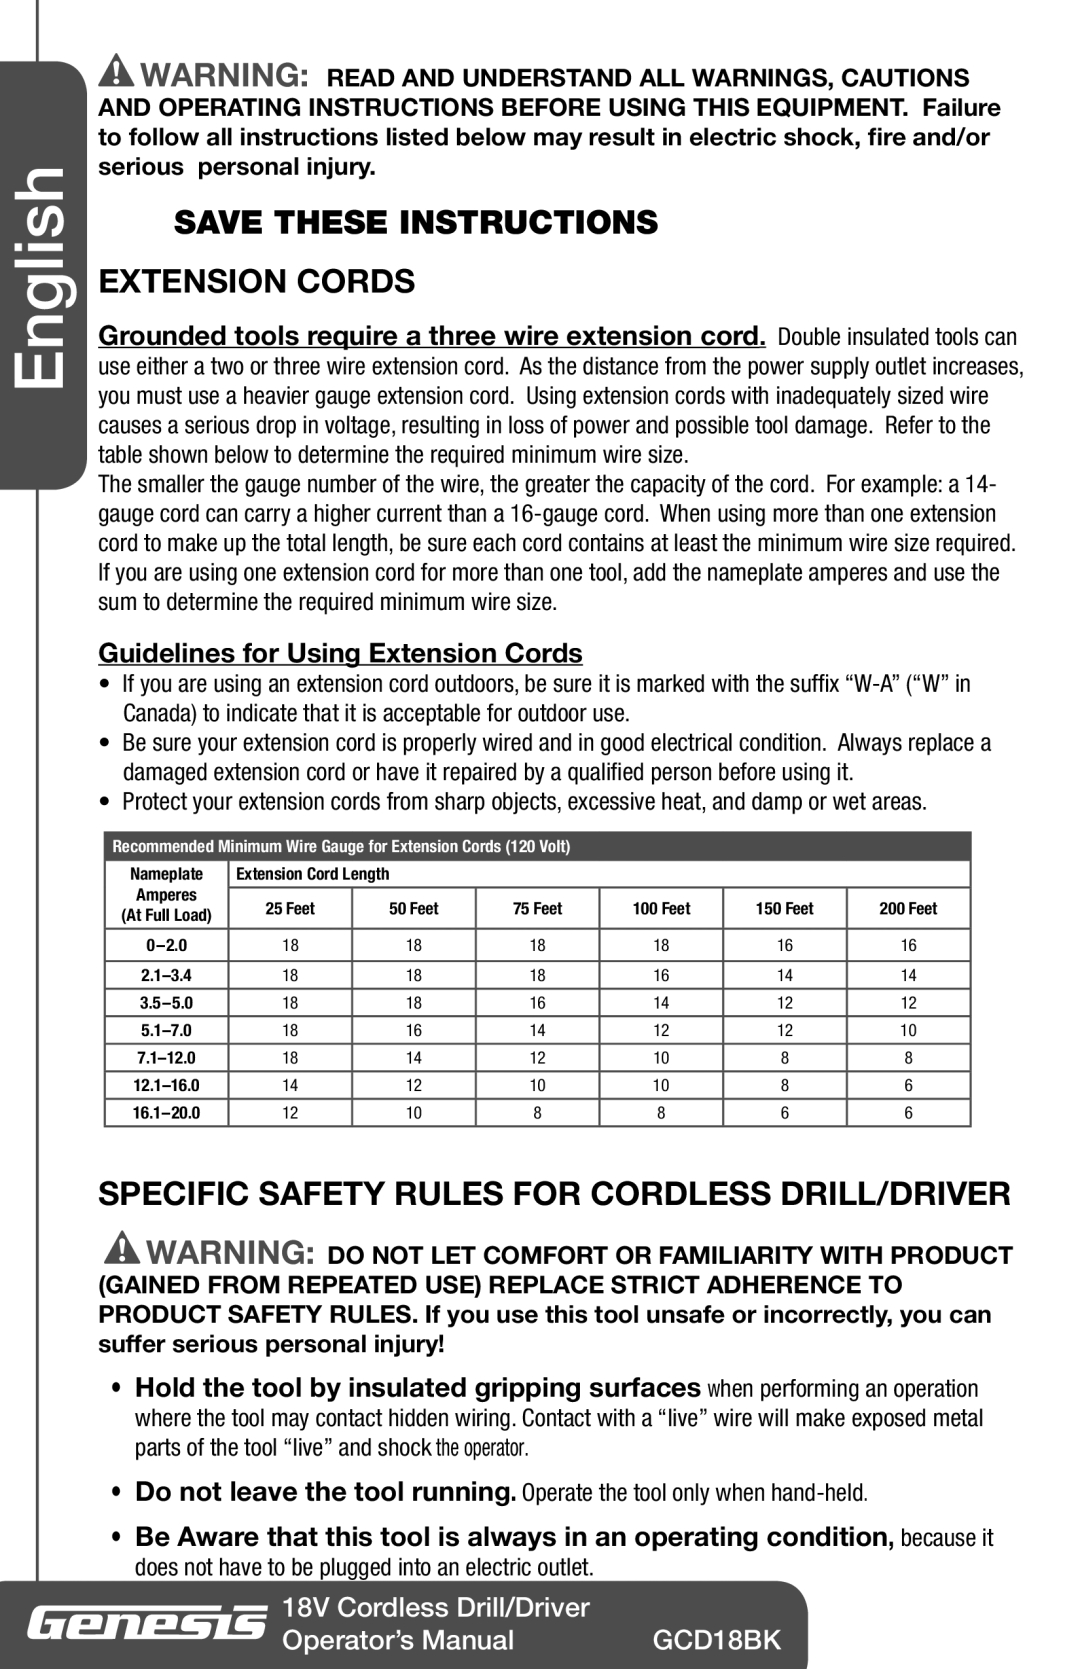 Genesis I.C.E GCD18BK Save These Instructions Extension Cords, Specific Safety Rules For Cordless Drill/Driver, English 